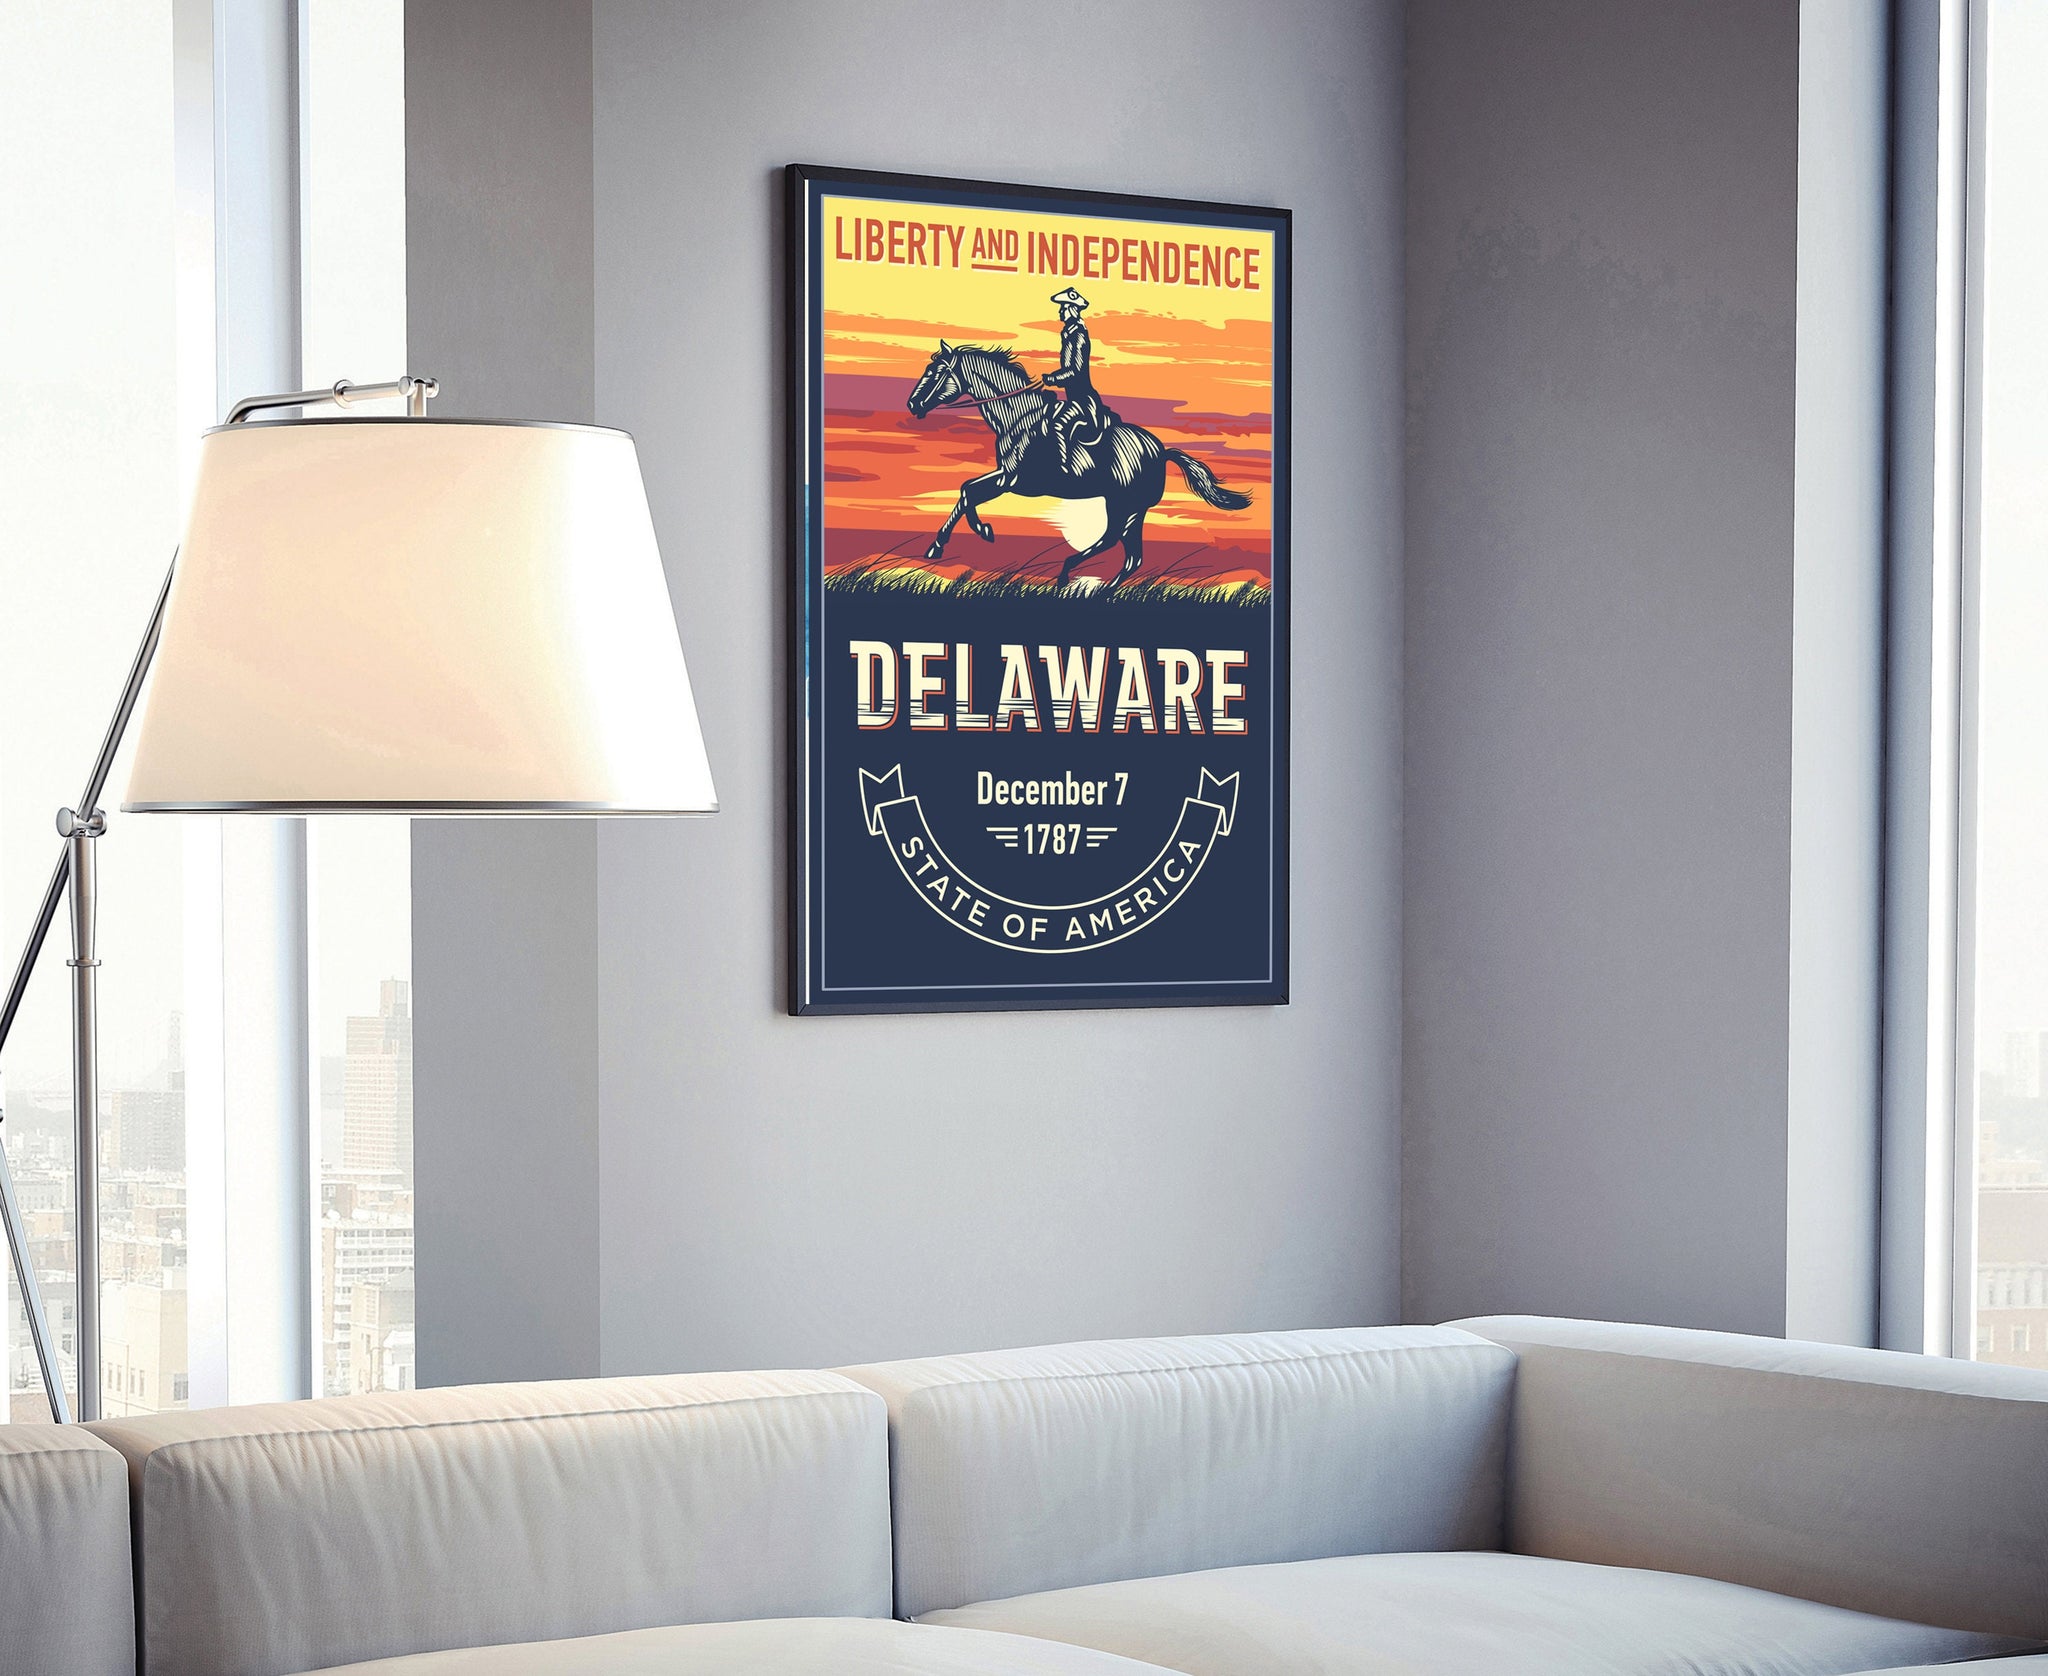 United States Delaware State Poster, Delaware Poster Print, Delaware State Emblem Poster, Retro Travel State Poster, Home Office Wall Art